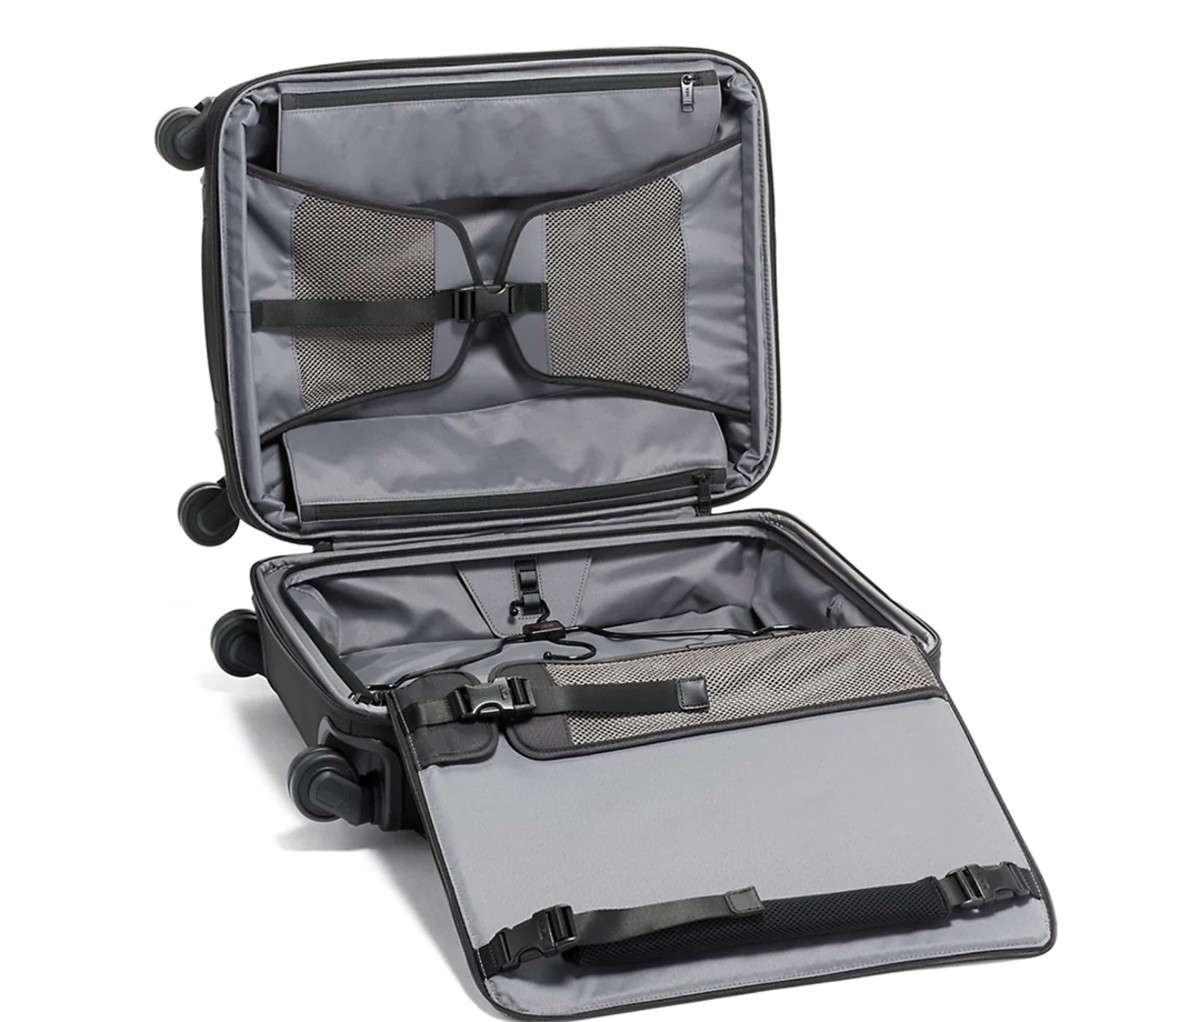 Gear Up for Spring Trips With a New Carry-On From Tumi - Men's Journal